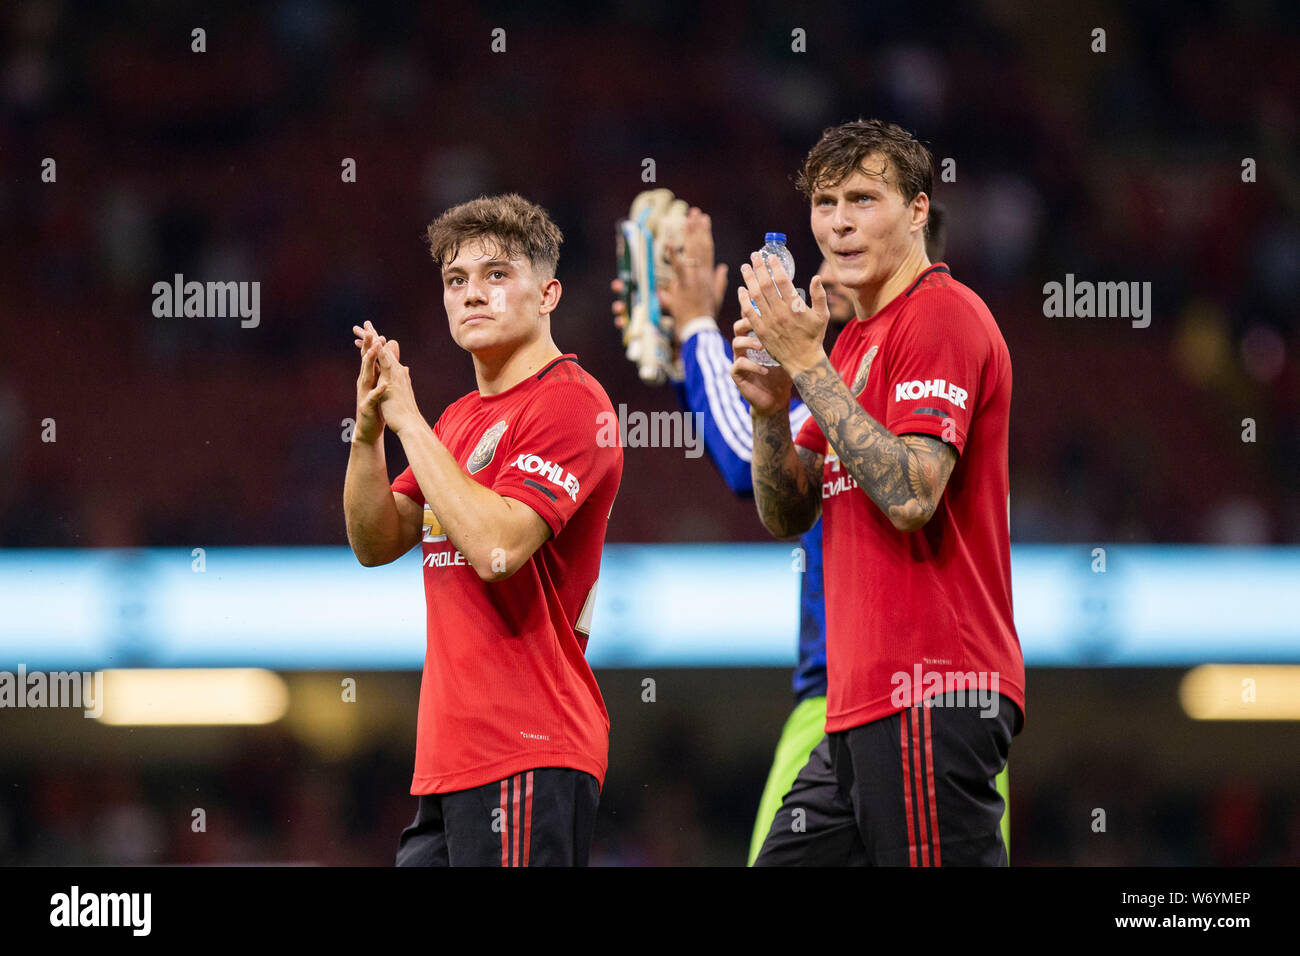 Cardiff, Wales, UK, August 3rd 2019. Dan James and Victor Lindelof of Manchester United claps the fans after the International Champions Cup match between Manchester United and AC Milan at the Principality Stadium in Cardiff. Credit: Mark Hawkins/Alamy Live News Credit: Mark Hawkins/Alamy Live News Stock Photo